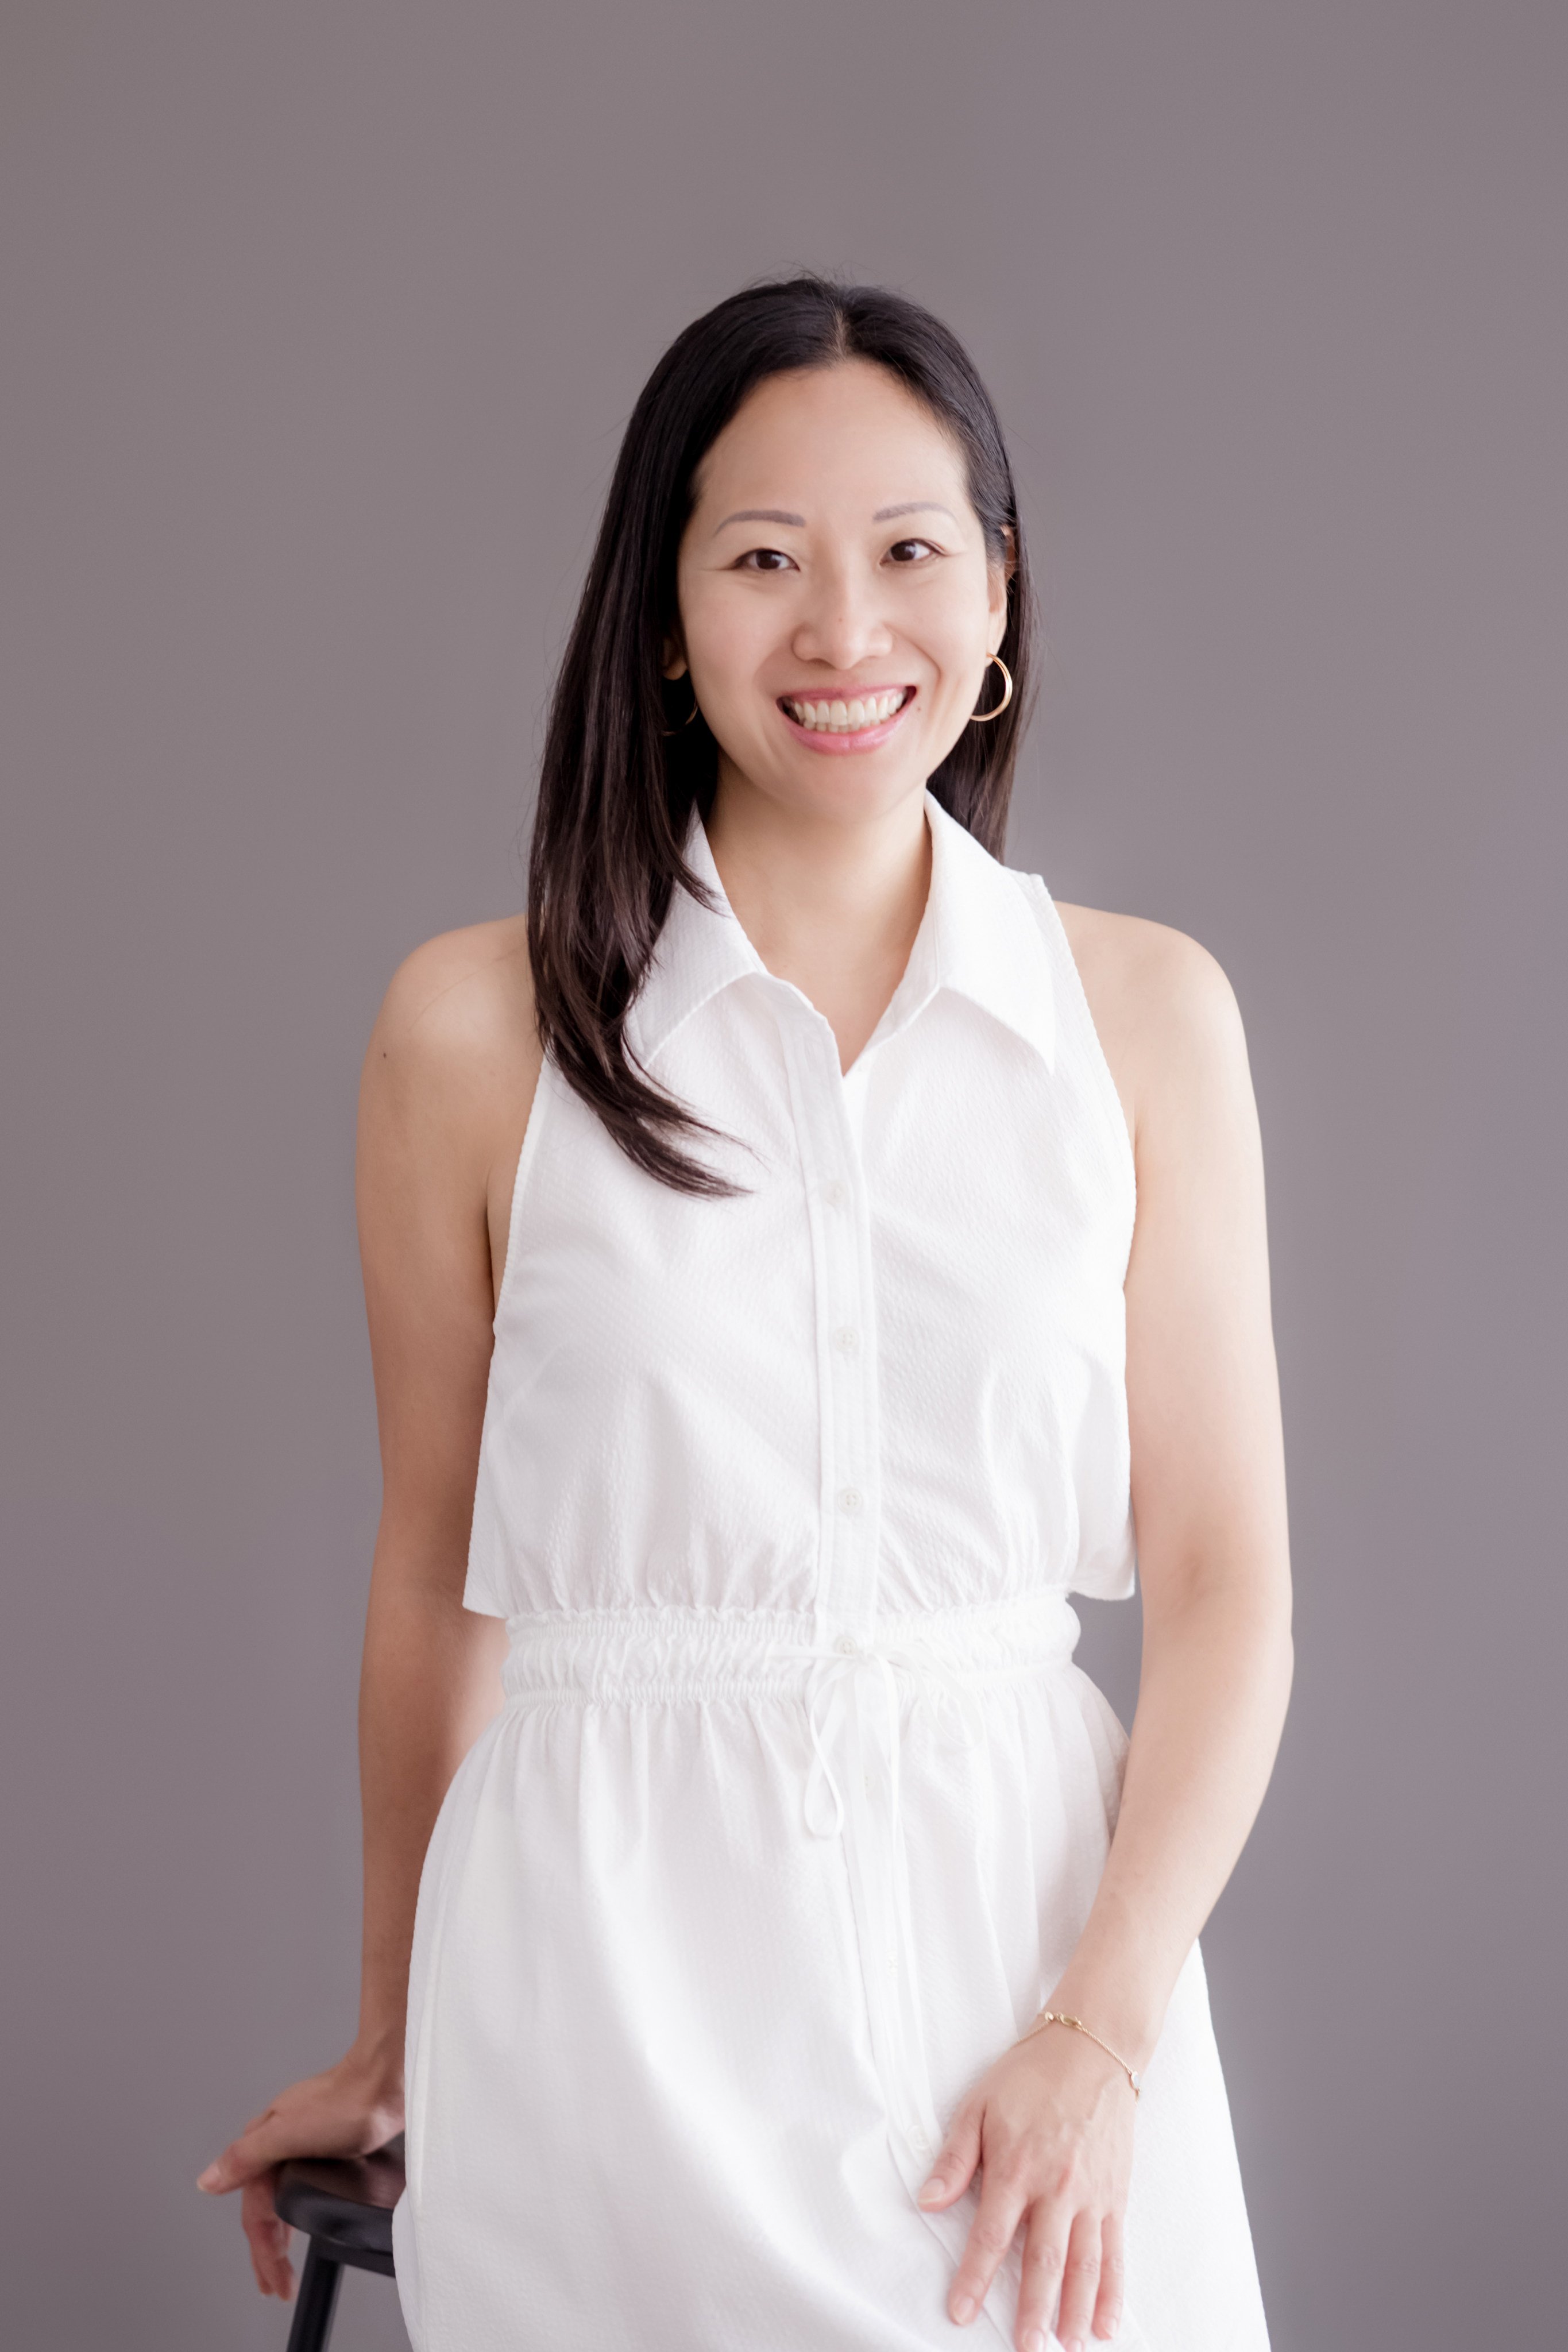 Christine Chow, co-founder and creative director of Hong Kong sustainable fashion label Tove & Libra, says F. Scott Fitzgerald’s first book “This Side of Paradise” had “such an effect on me”. Photo: Tove & Libra